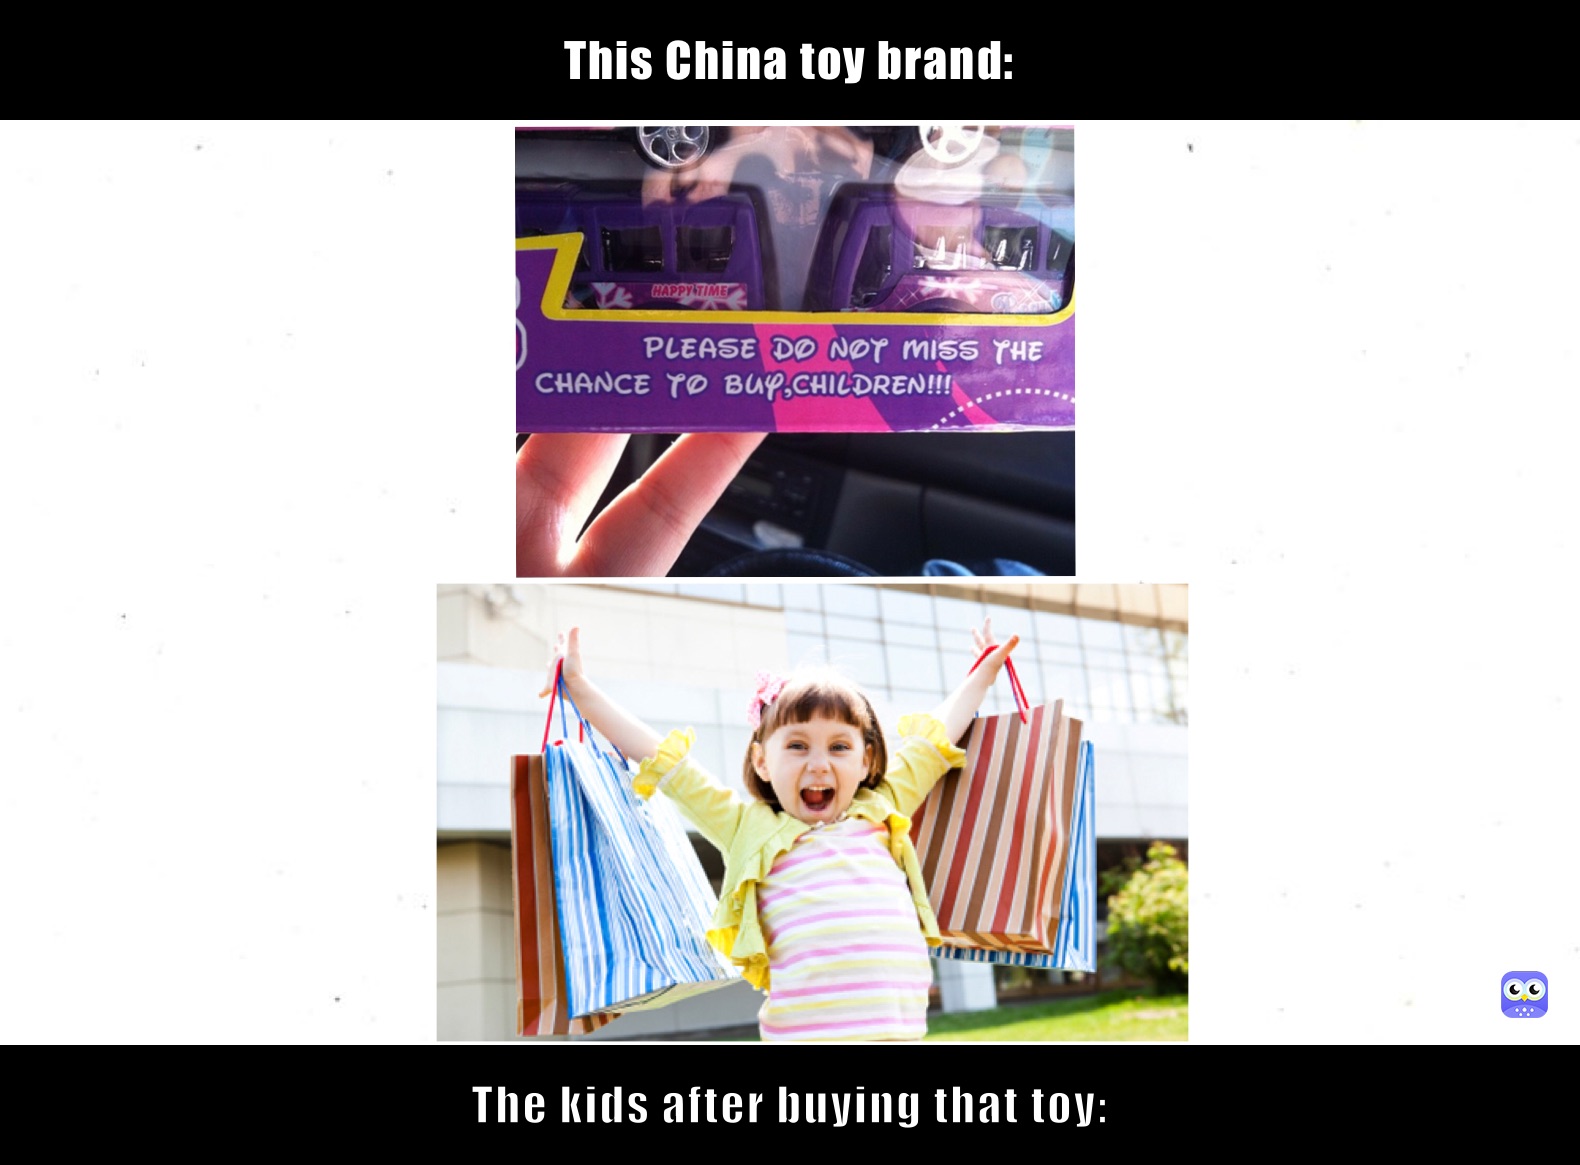 This China toy brand: The kids after buying that toy: